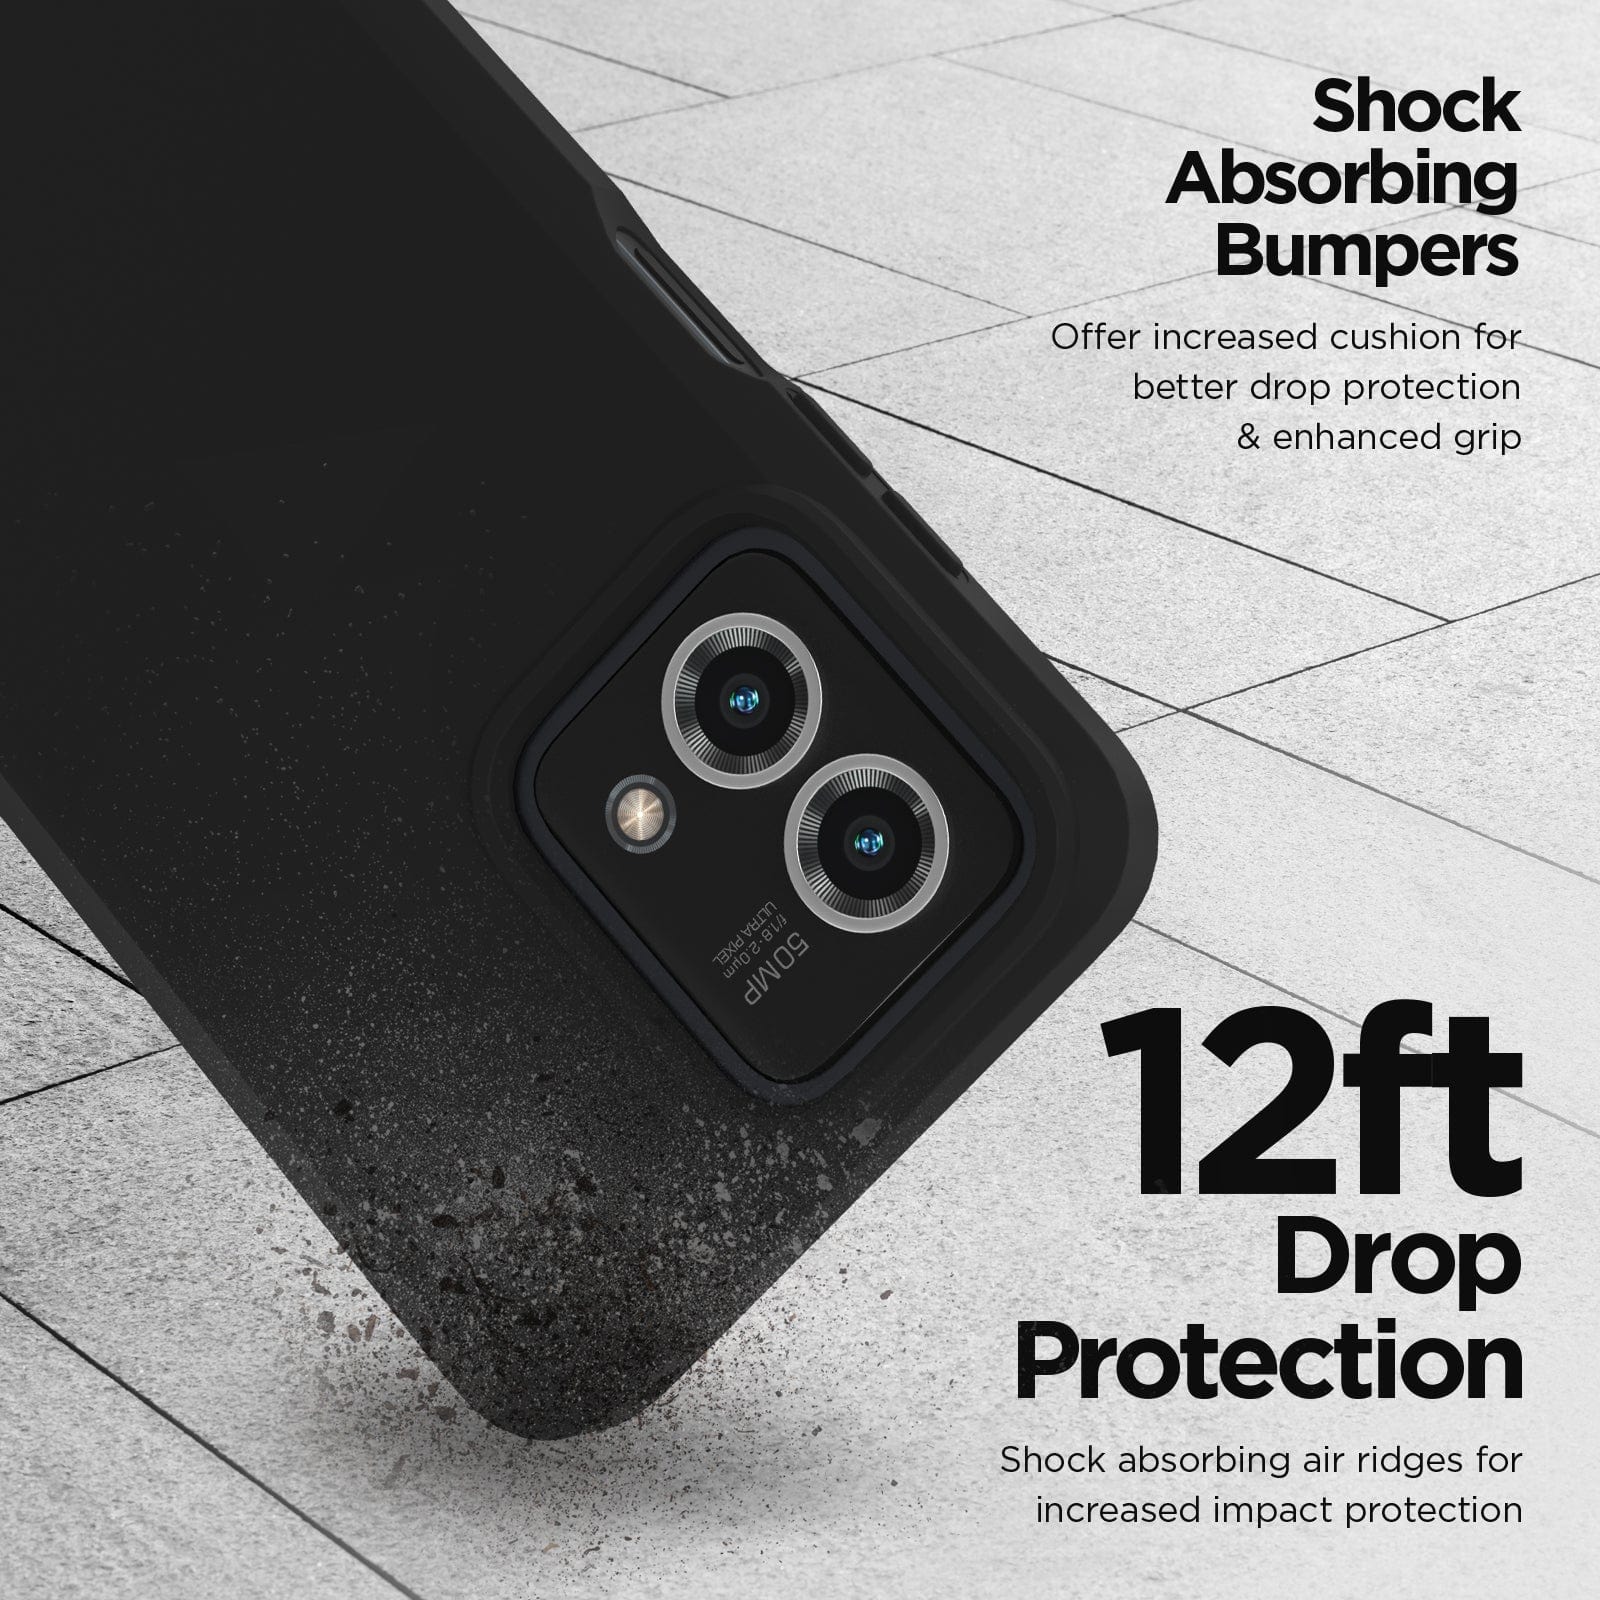 Shock absorbing bumpers. Offer increased cushion for better drop protection & enhanced grip. 12ft Drop Protection. Shock absorbing air ridges for increased impact protection. 